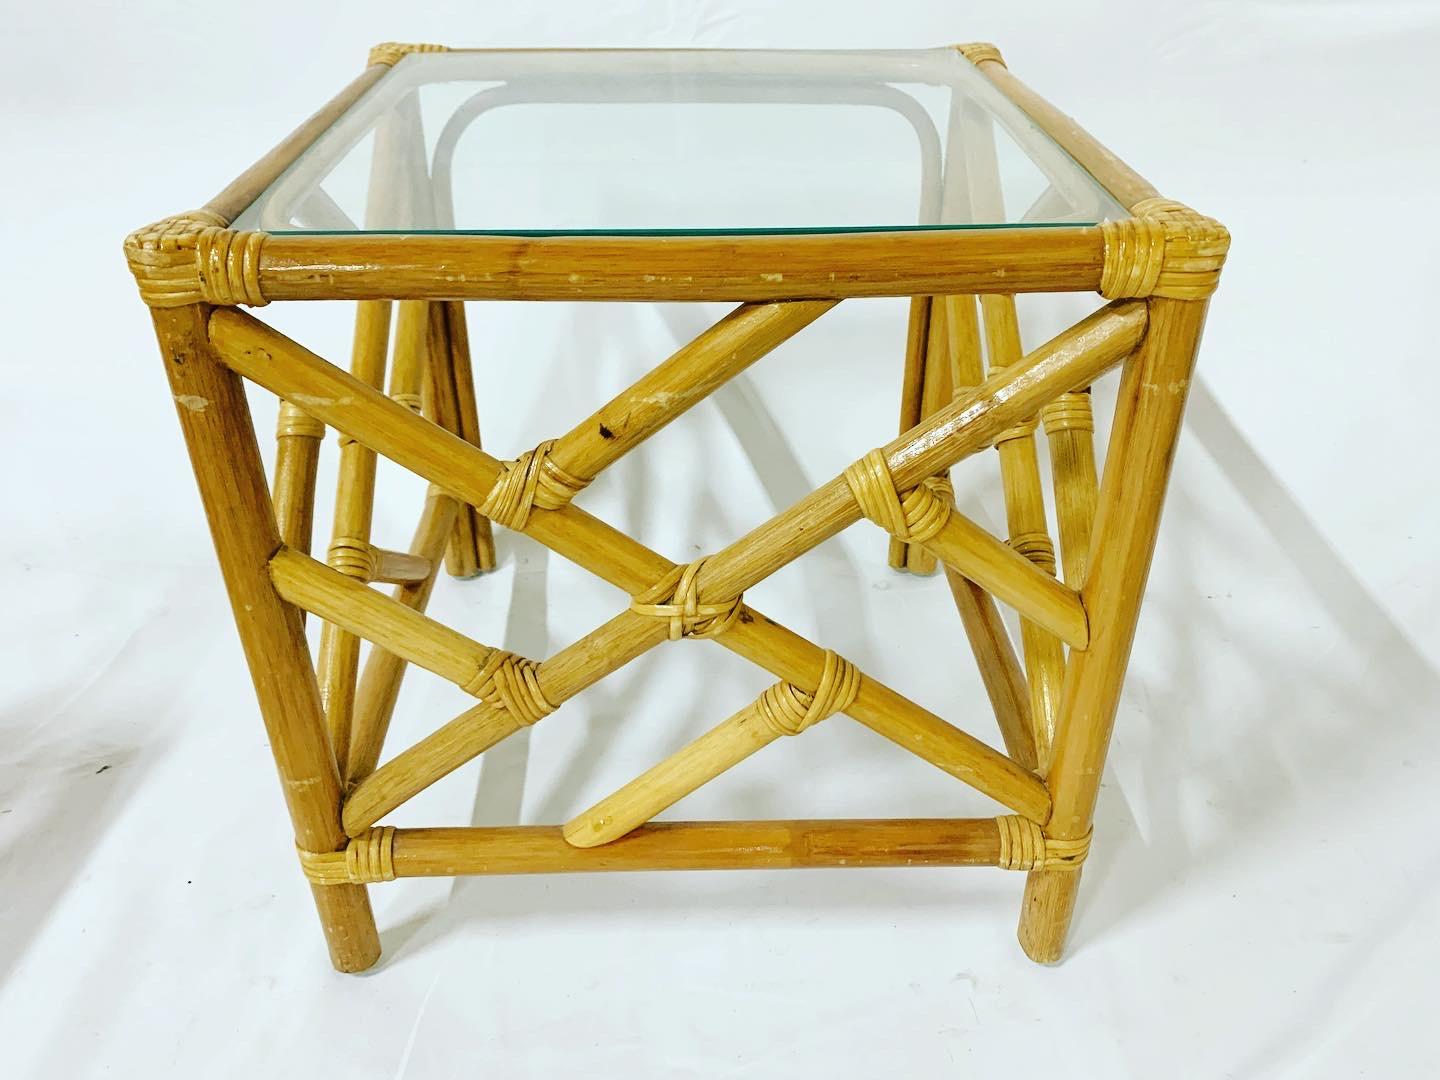 Chippendale Bamboo Rattan Nesting Tables - Set of 3 For Sale 2